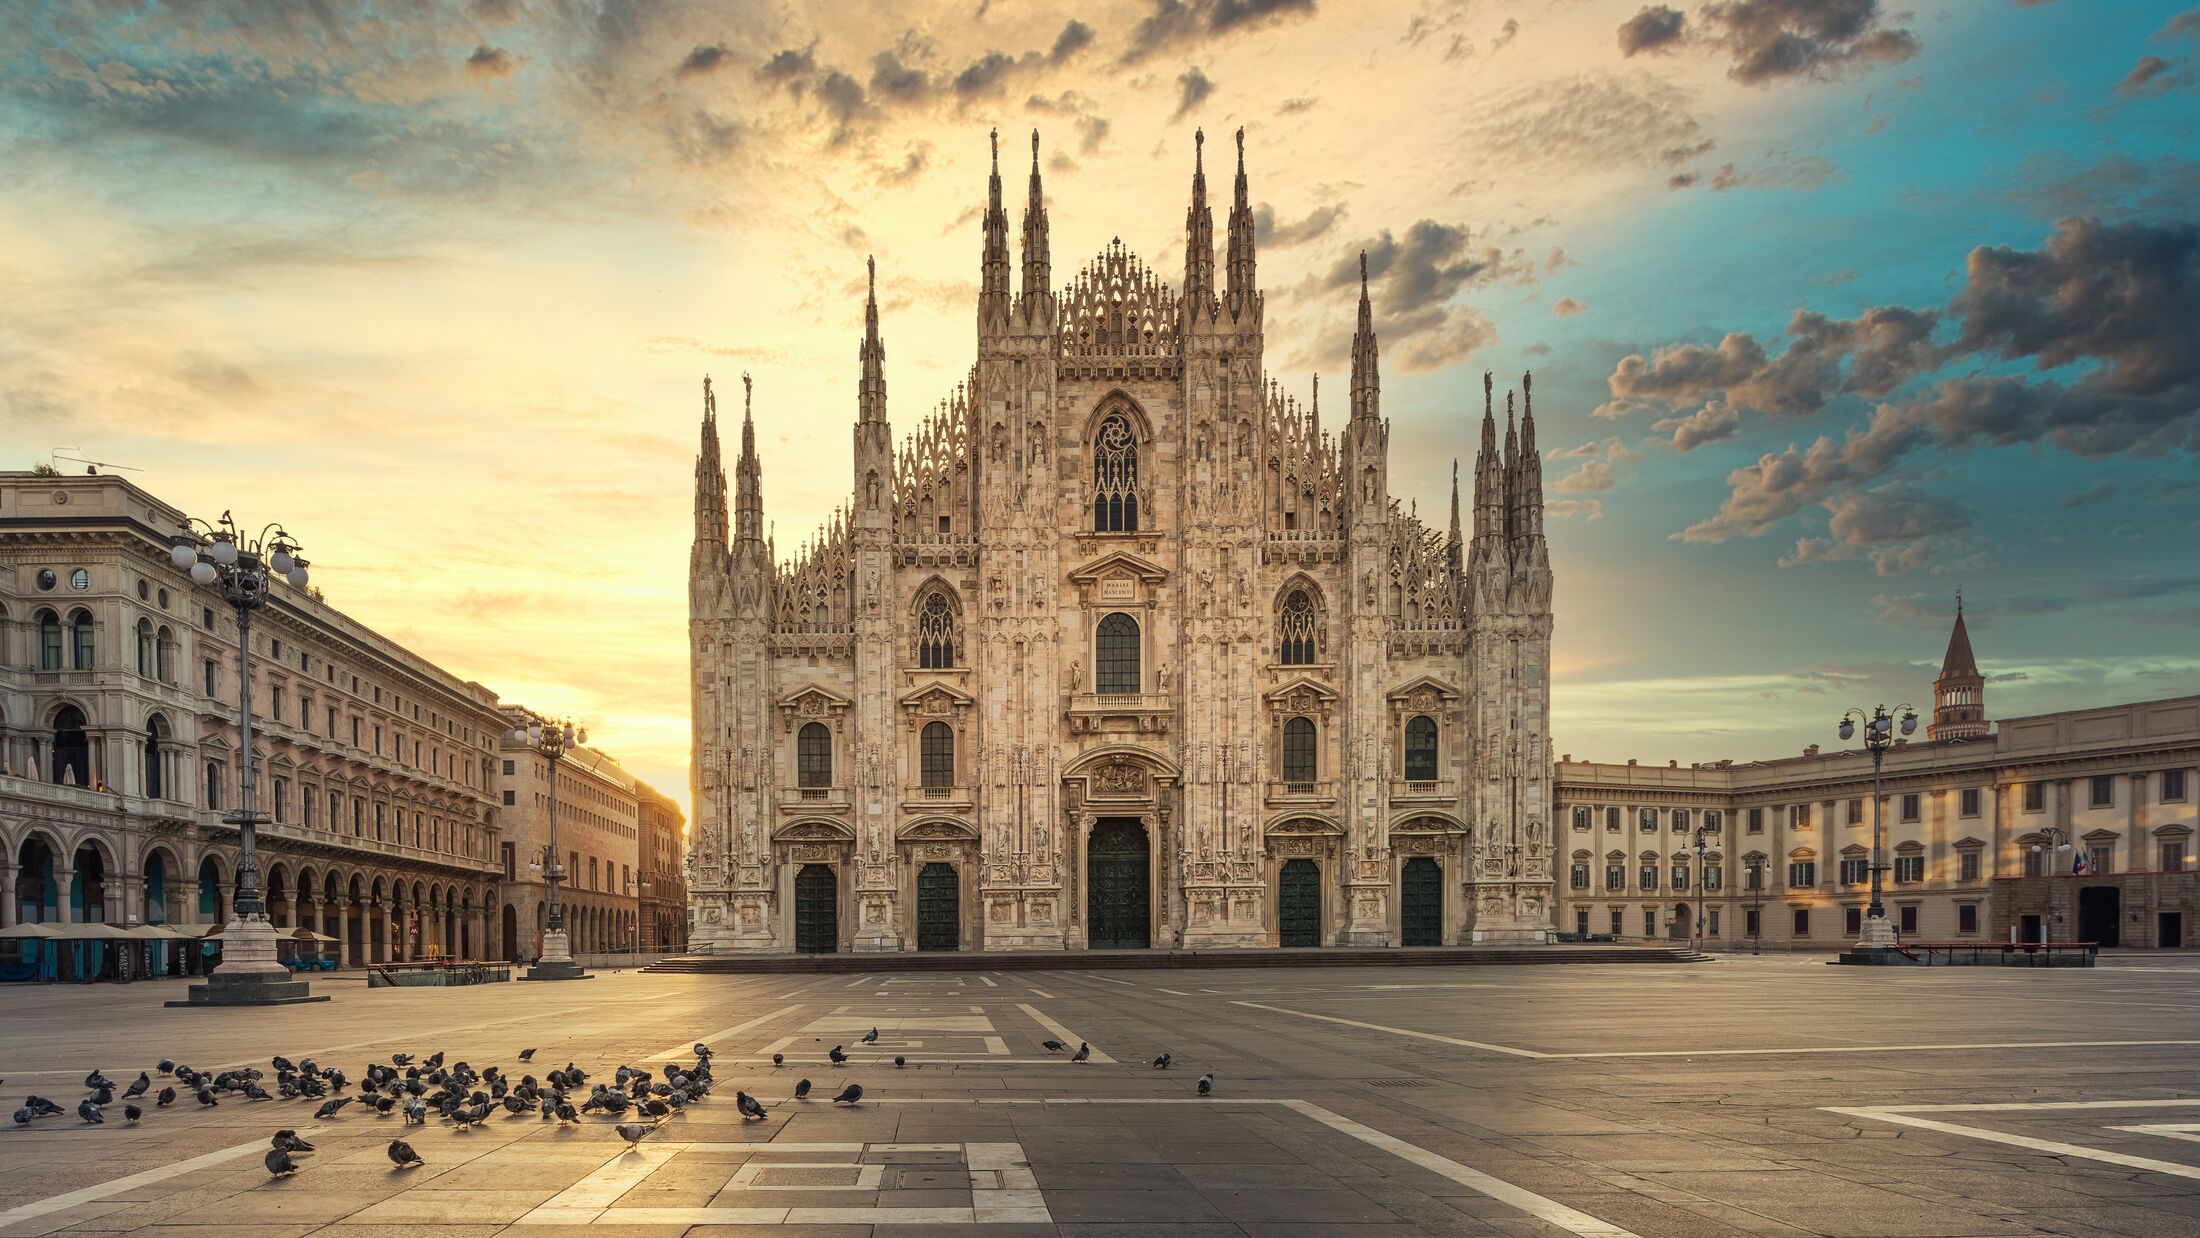 Duomo , Milan gothic cathedral at sunrise,Italy,Europe.Horizontal photo with copy-space.